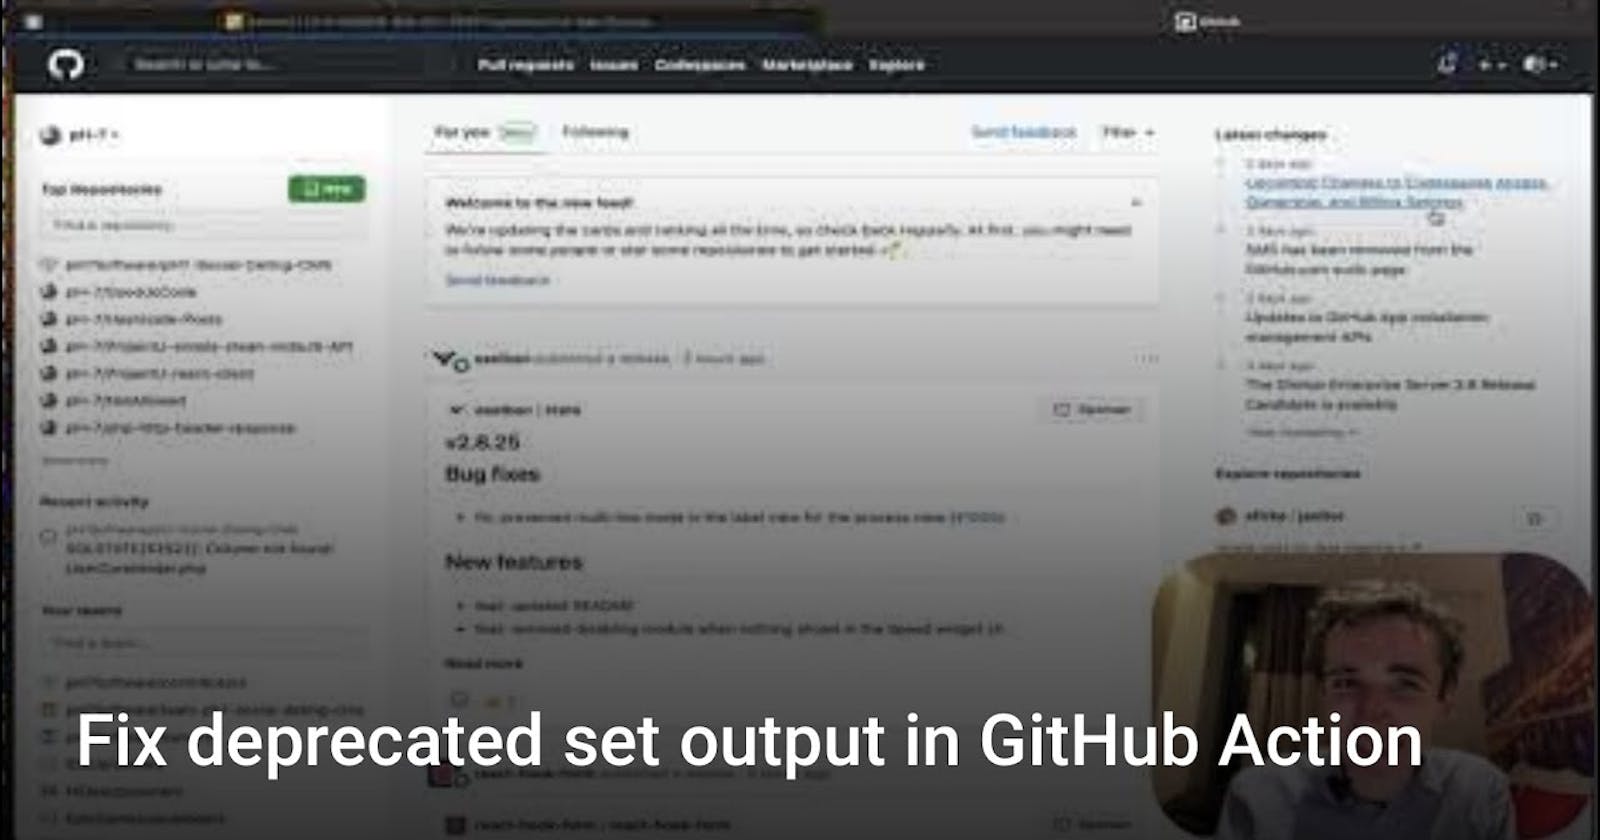 How to fix set-output command in GitHub Actions?